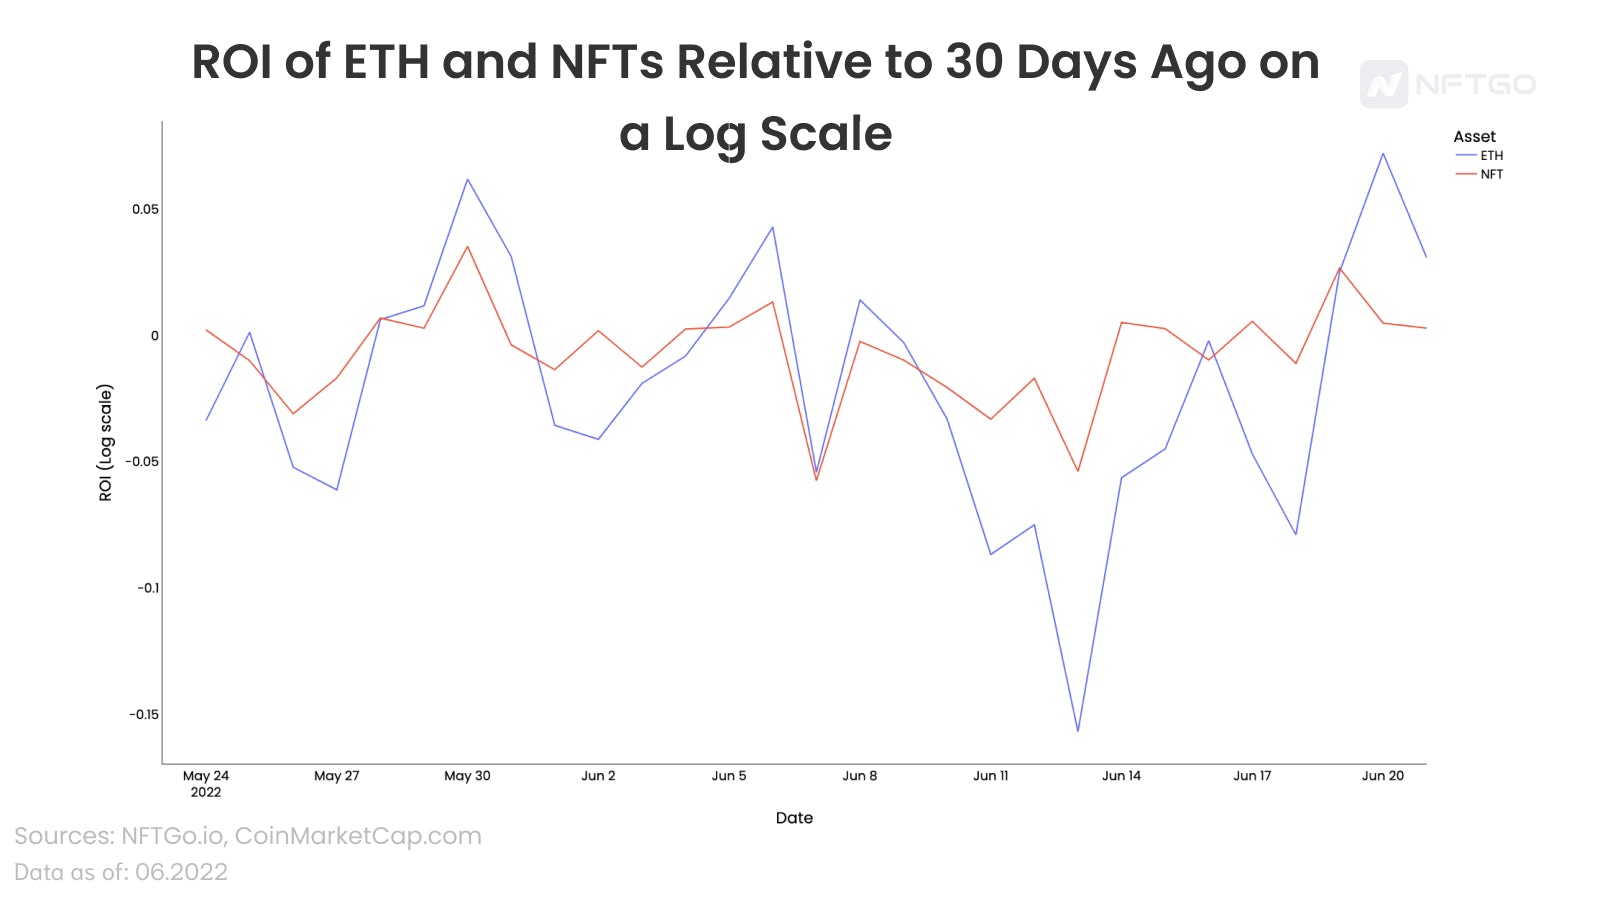 ROI of ETH and NFTs Relative to 30 Days Ago on a Log Scale 